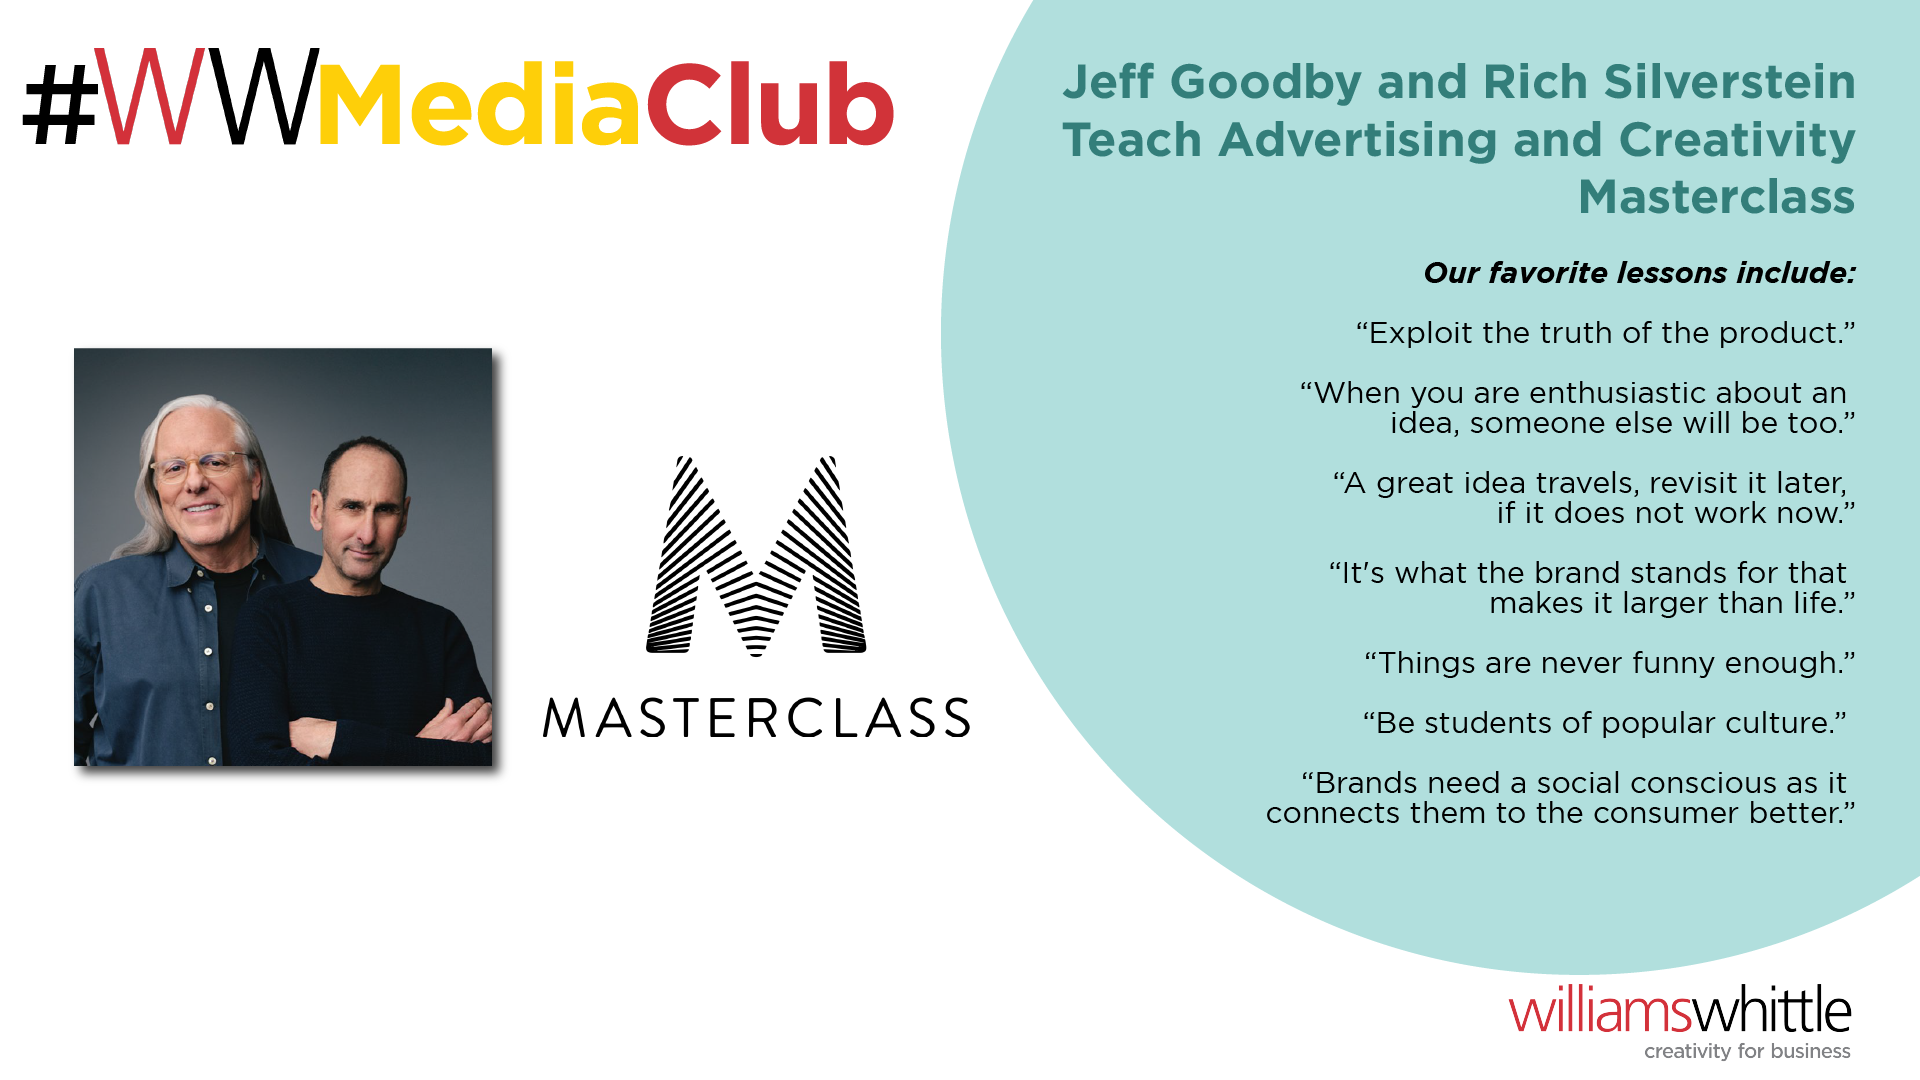 Masterclass: Jeff Goodby and Rich Silverstein Teach Advertising and Creativity